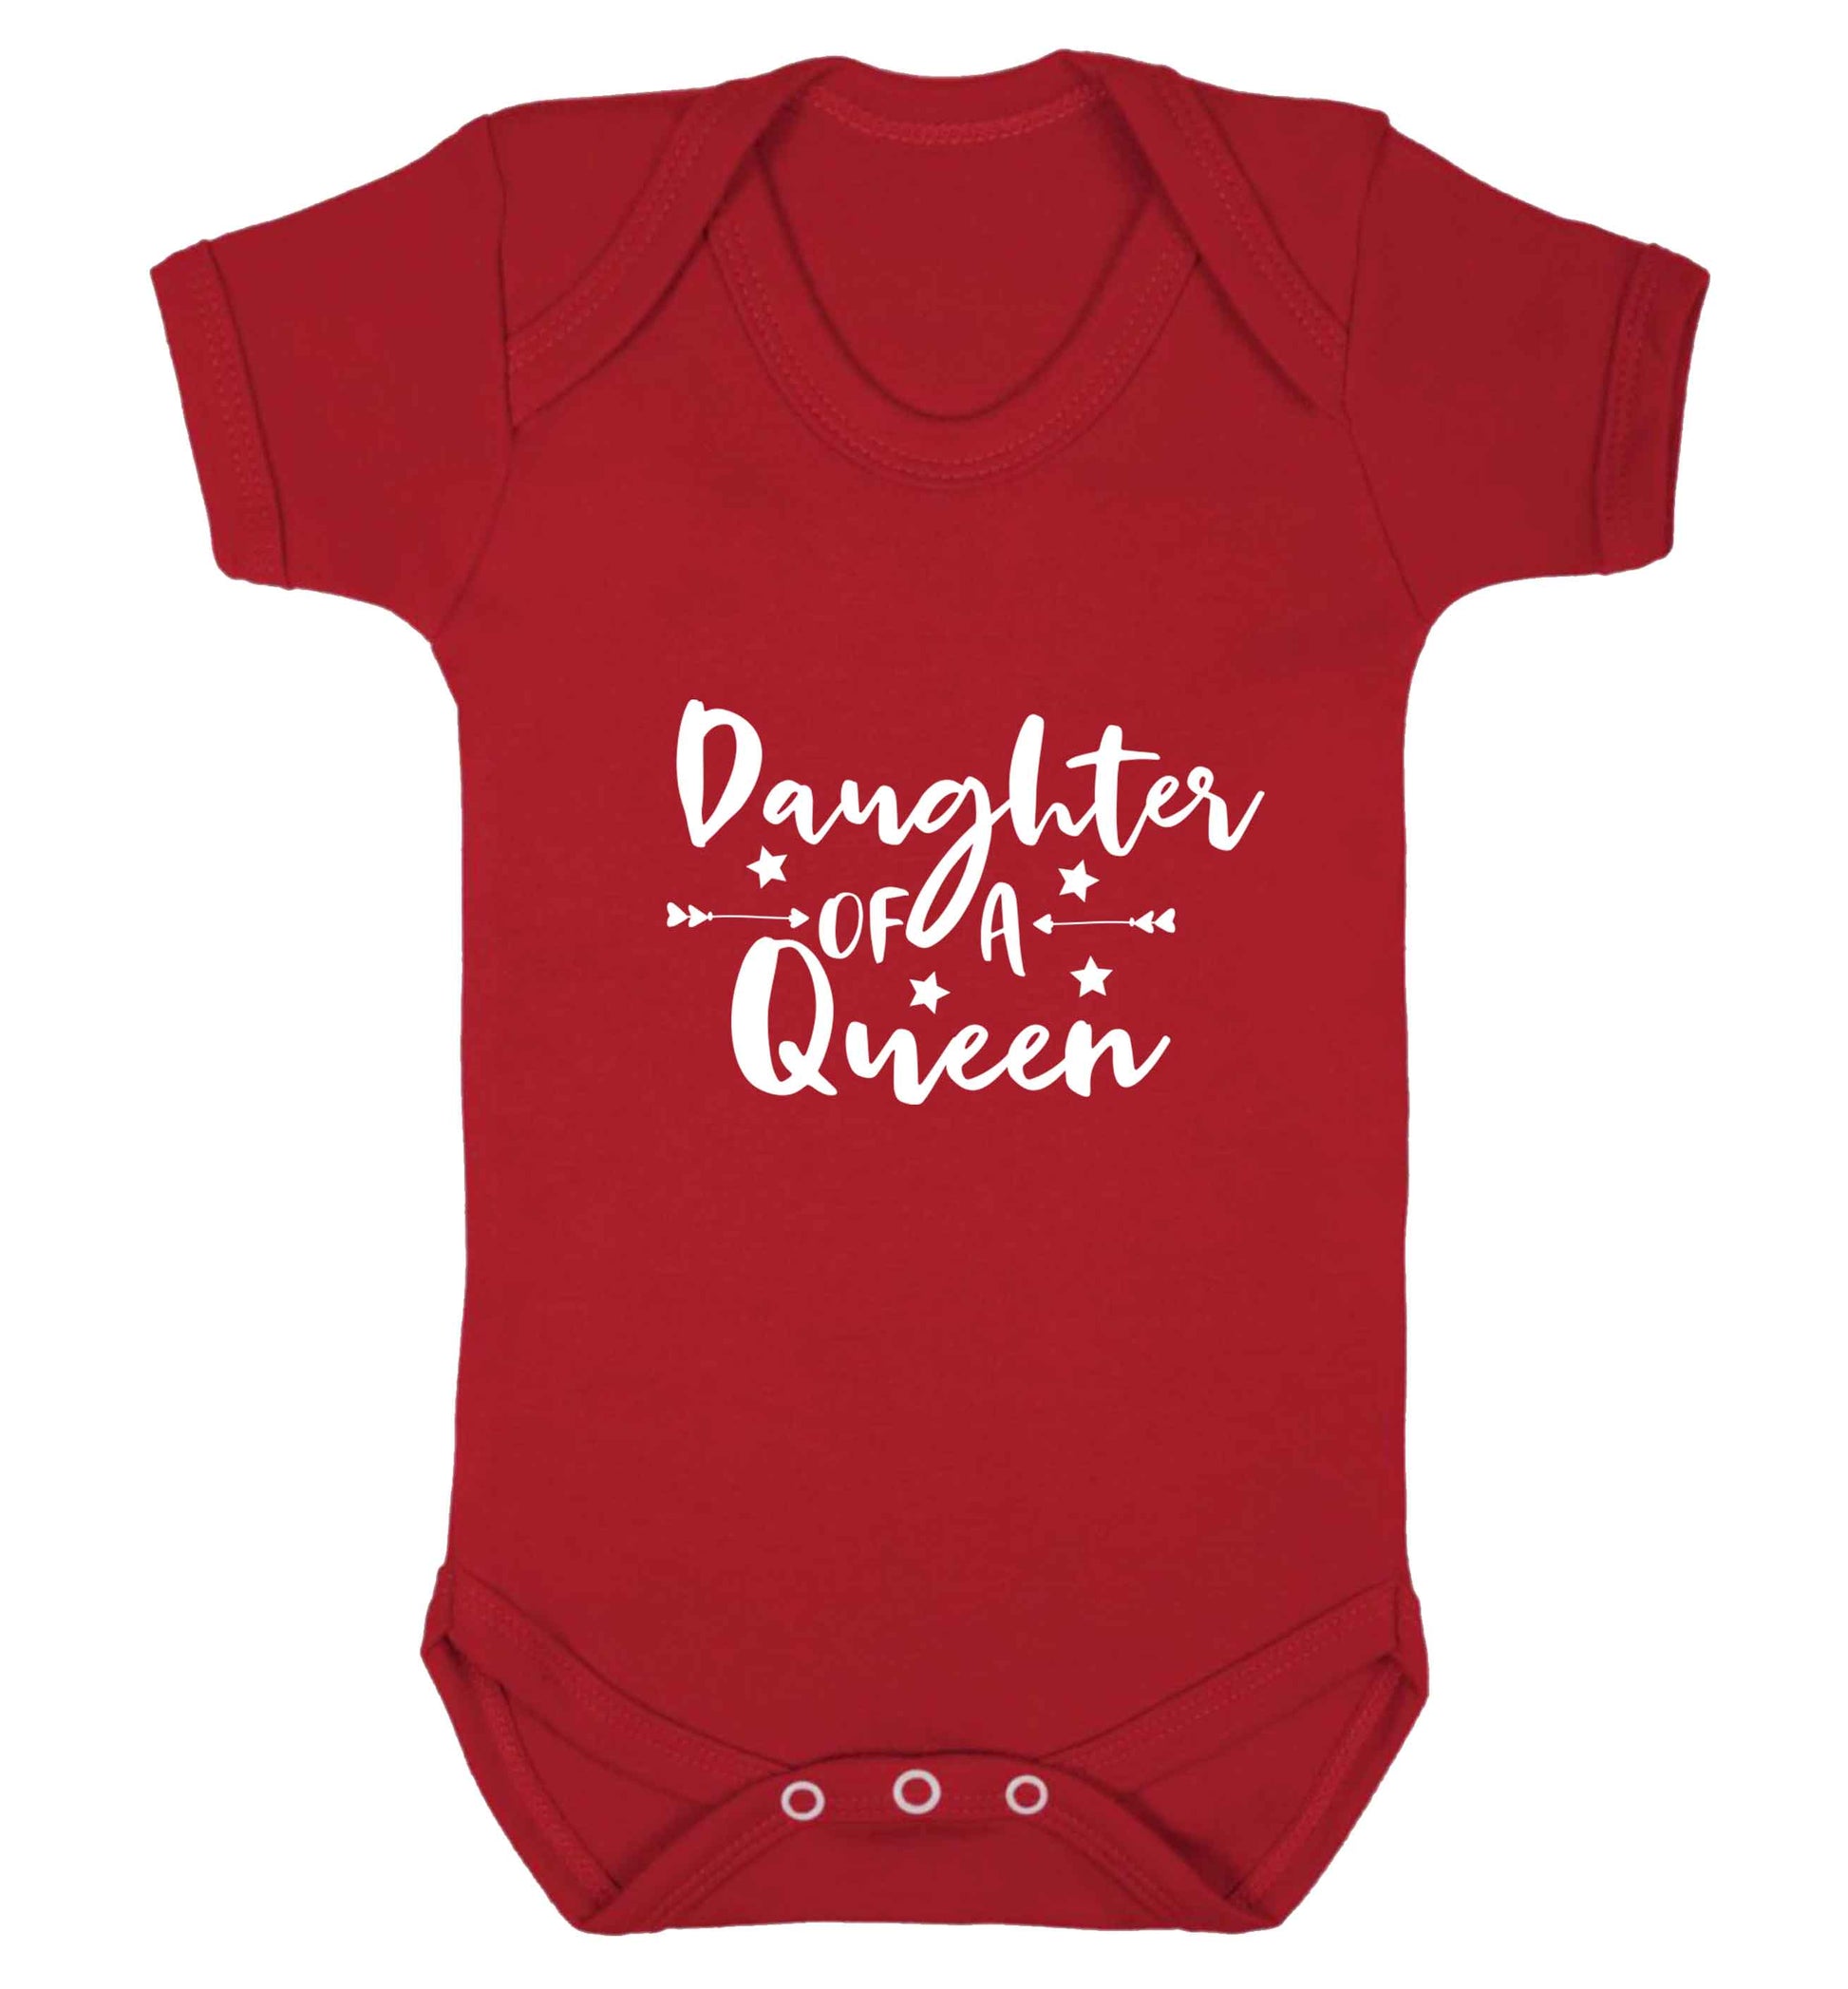 Daughter of a Queen baby vest red 18-24 months